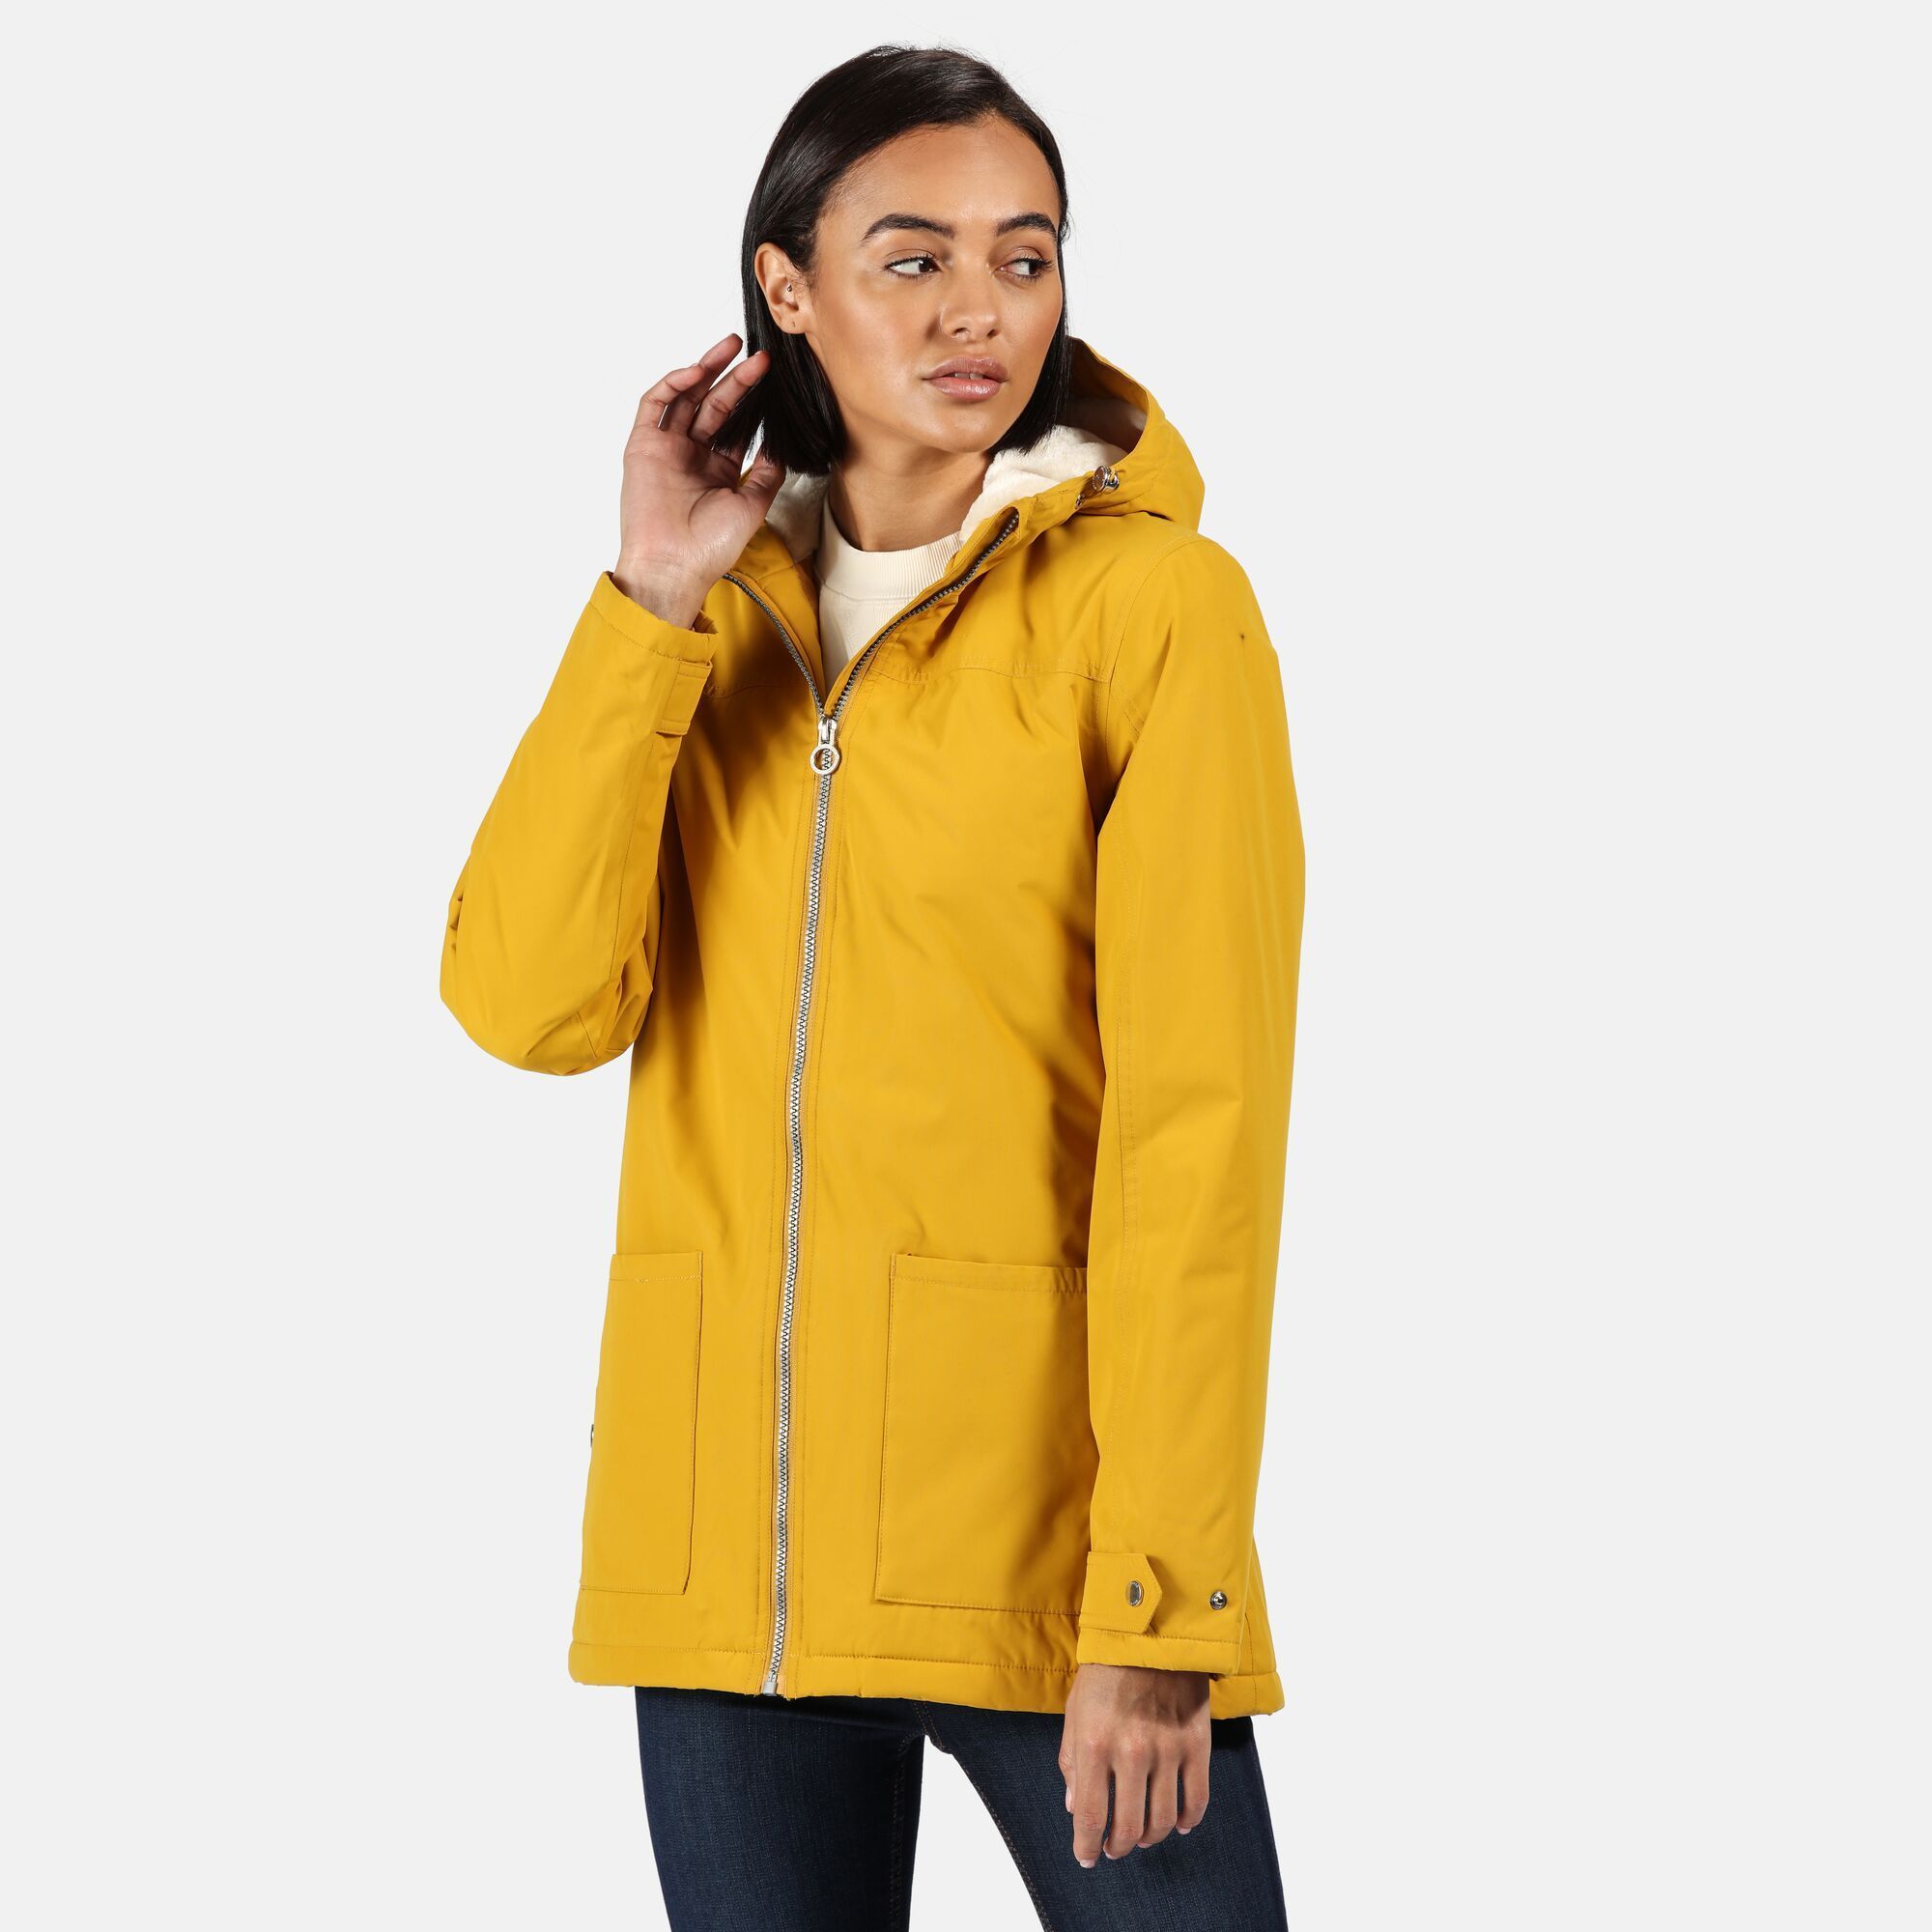 Material: 100% Polyester. Fabric: Faux Fur, Hydrafort. Design: Plain. Fit: Regular. Fabric Technology: Durable. Hooded, Insulated, Side Seams, Taped seam, Thermo-Guard, Waterproof. Cuff: Adjustable. Neckline: Hooded. Sleeve-Type: Long-Sleeved. Hood Features: Adjustable, Grown On Hood. Length: Regular. Pockets: 2 Front Pockets, 1 Security Pocket. Fastening: Full Zip.